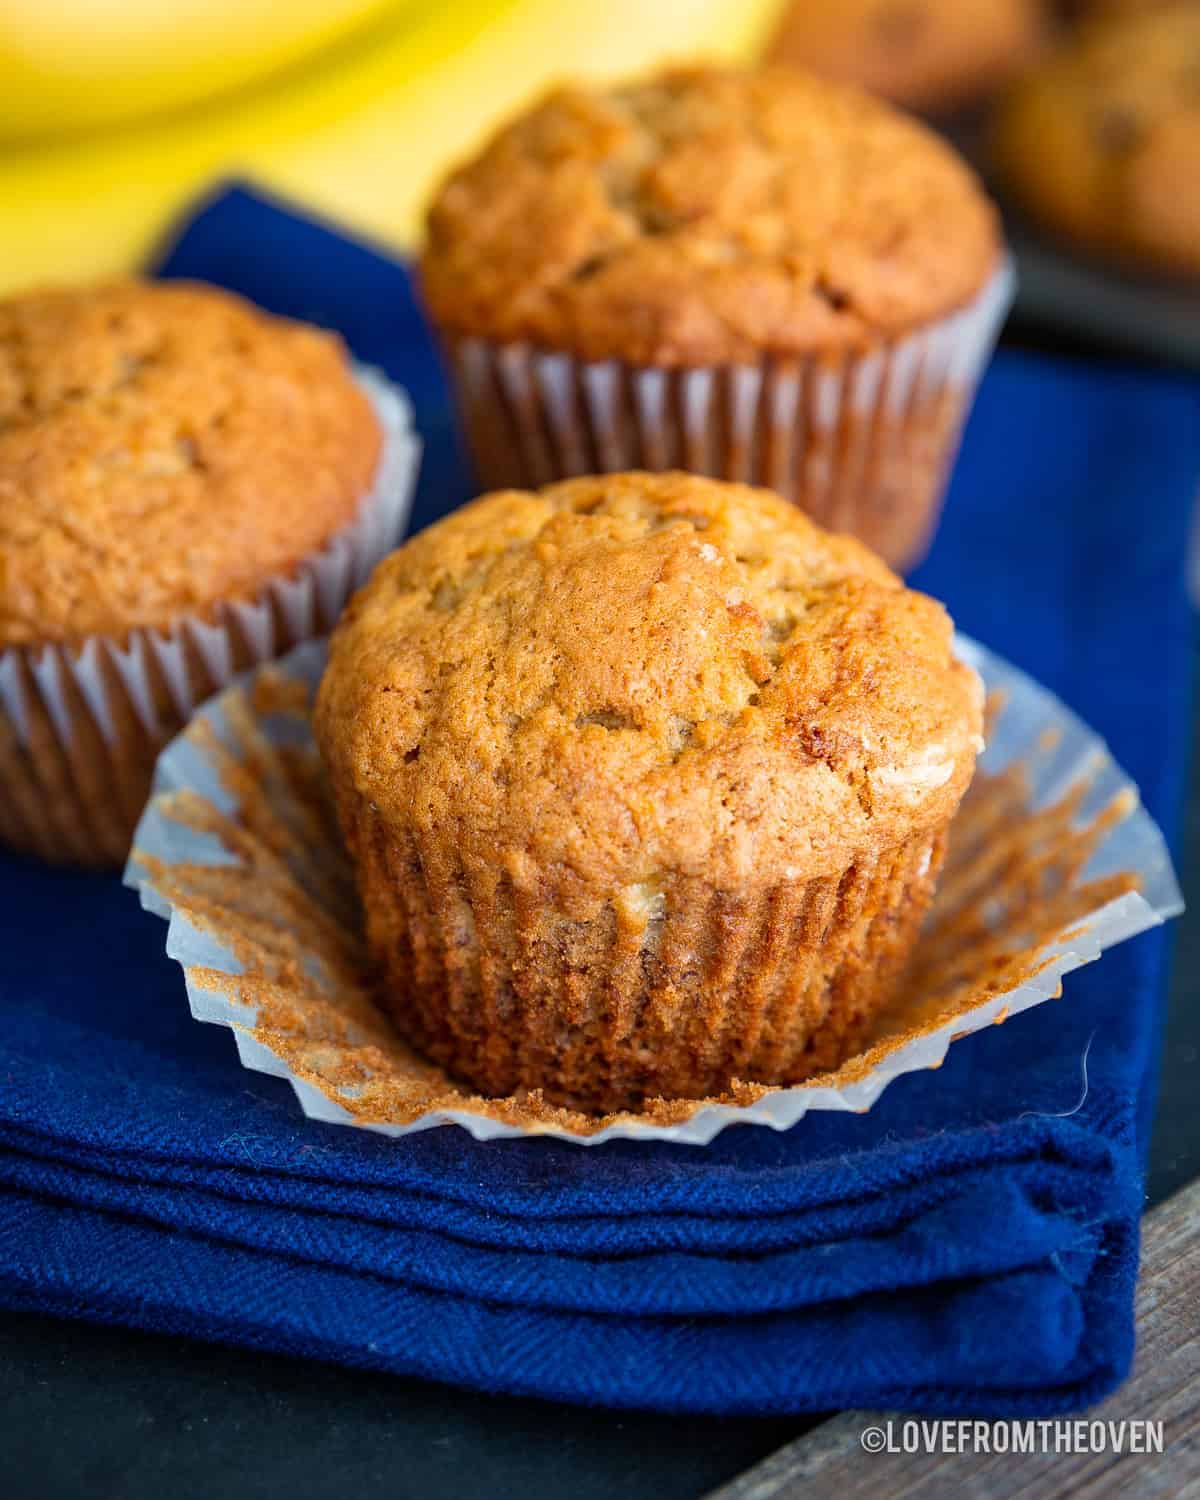 The Best Way to Store Quick Breads and Muffins